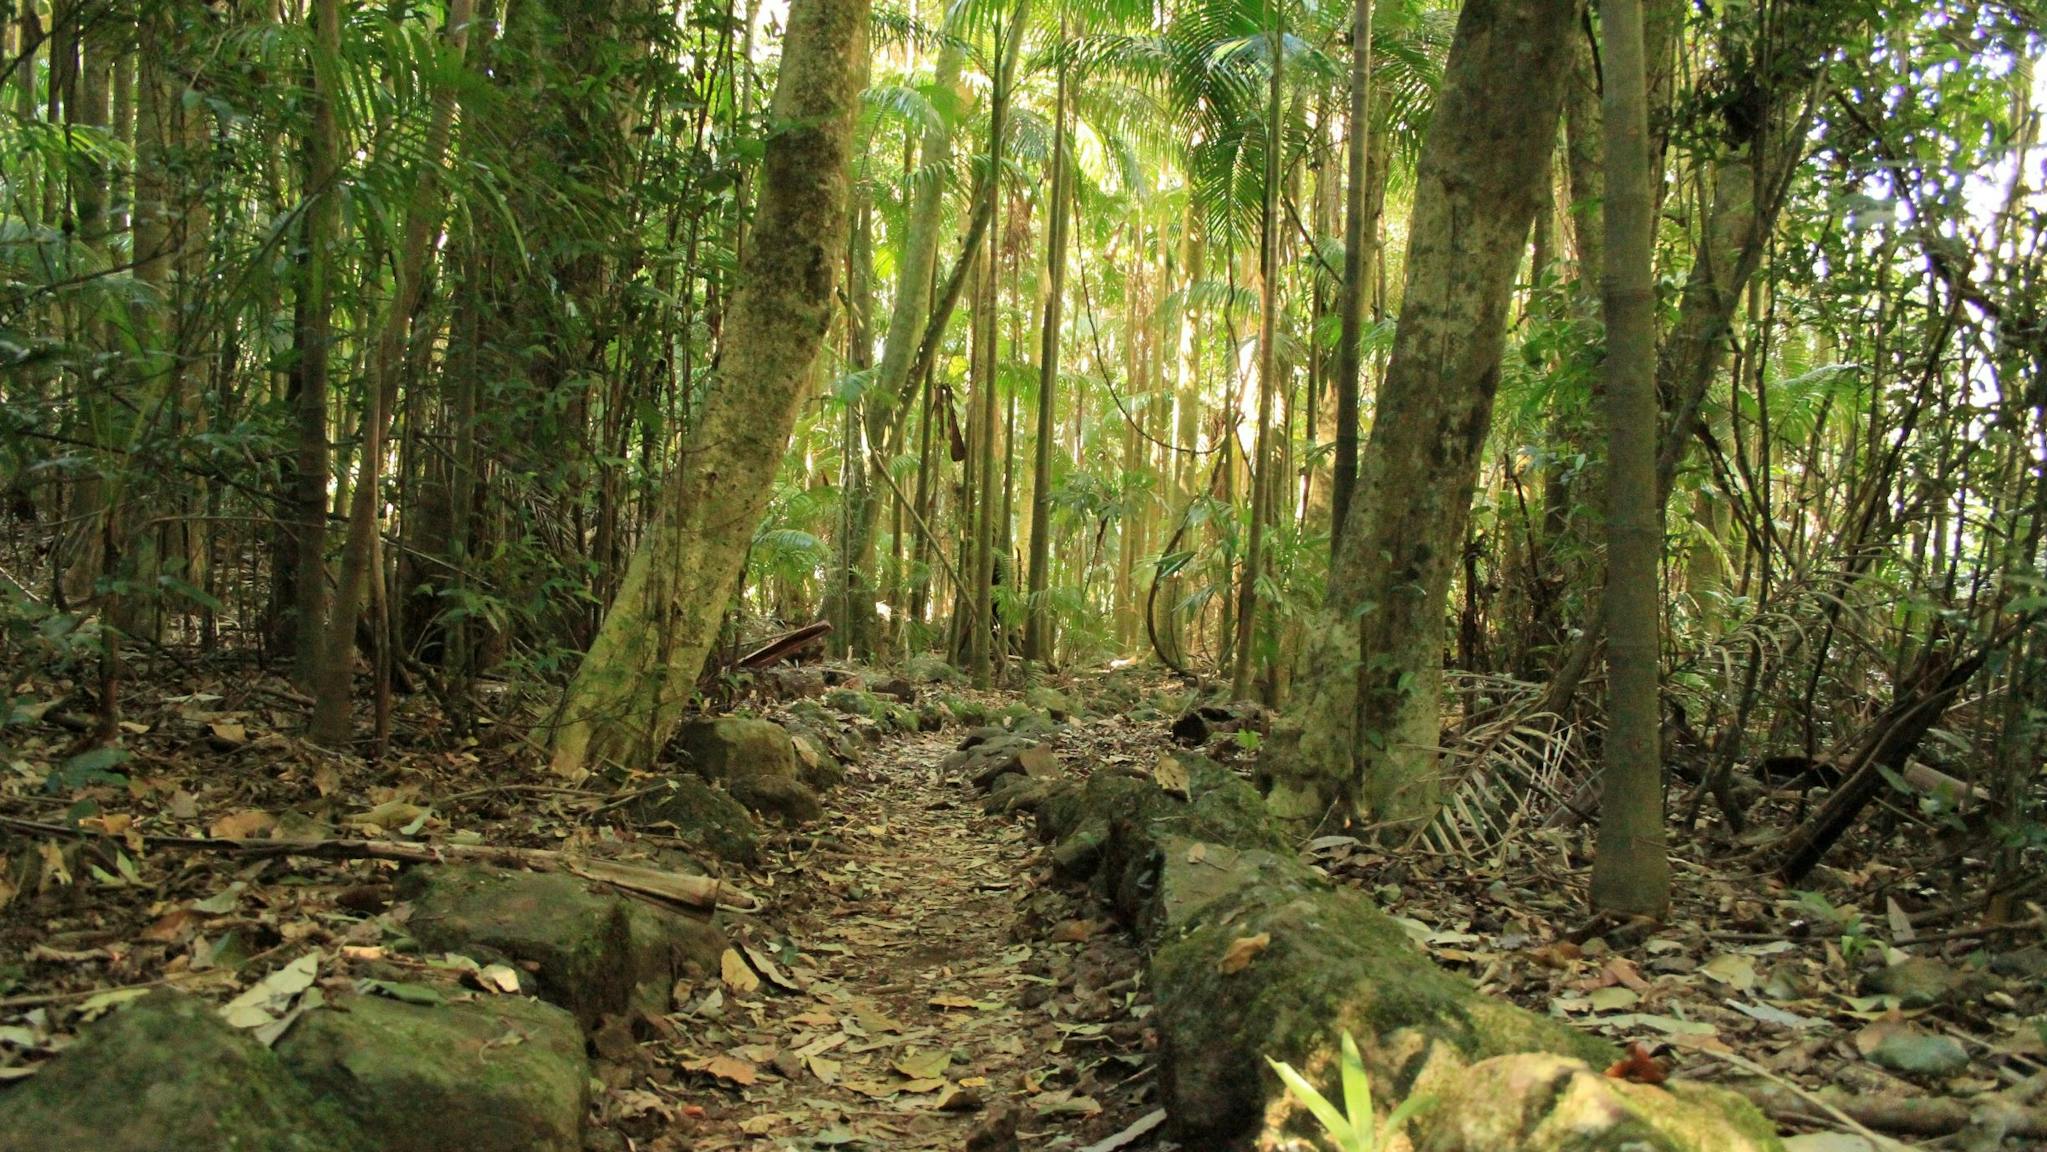 A track leads through a forest of tall slender palm trunks with light green foliage above.